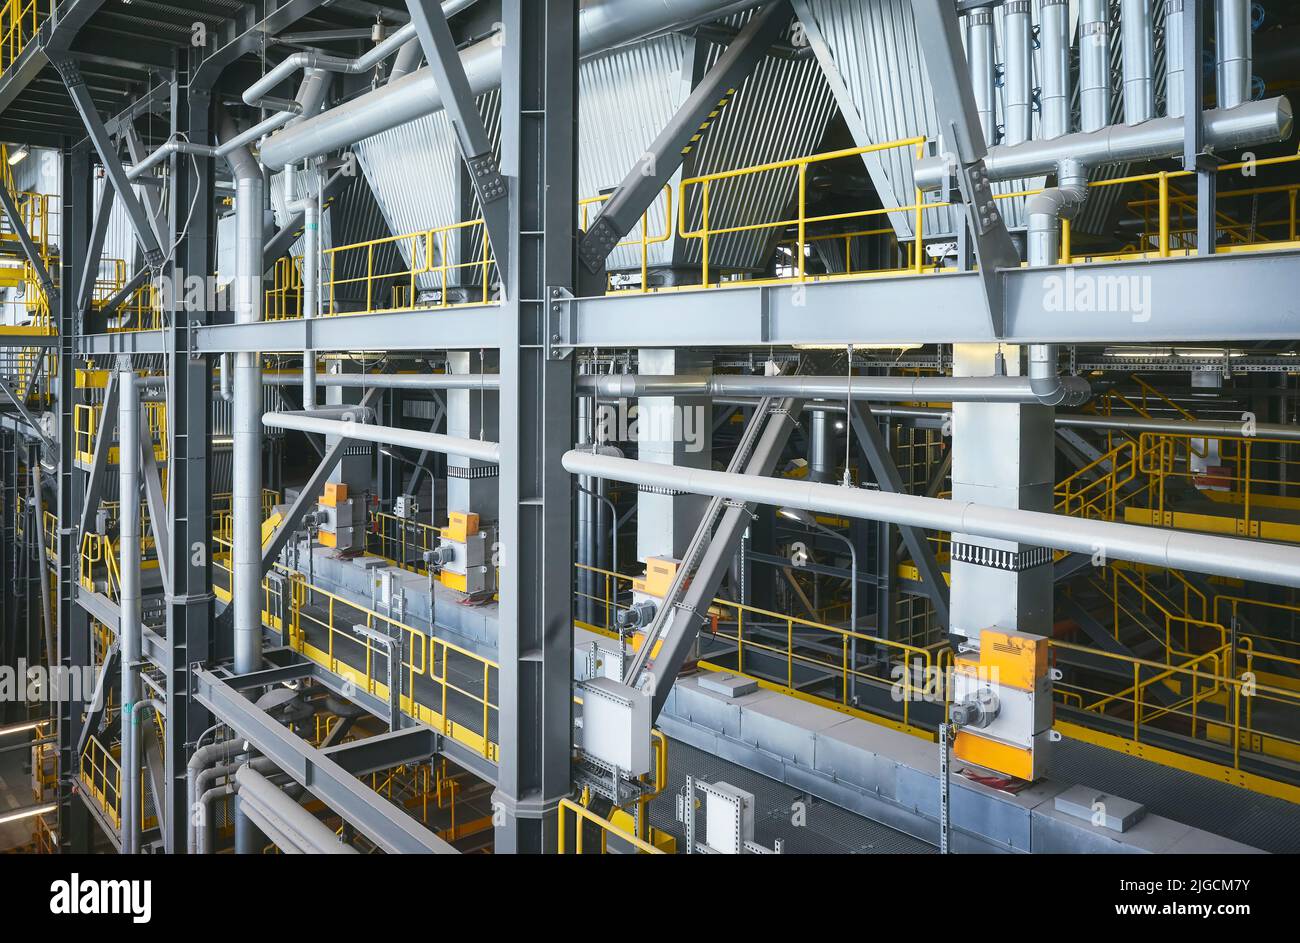 Interior of a waste incineration plant, industrial infrastructure concept. Stock Photo